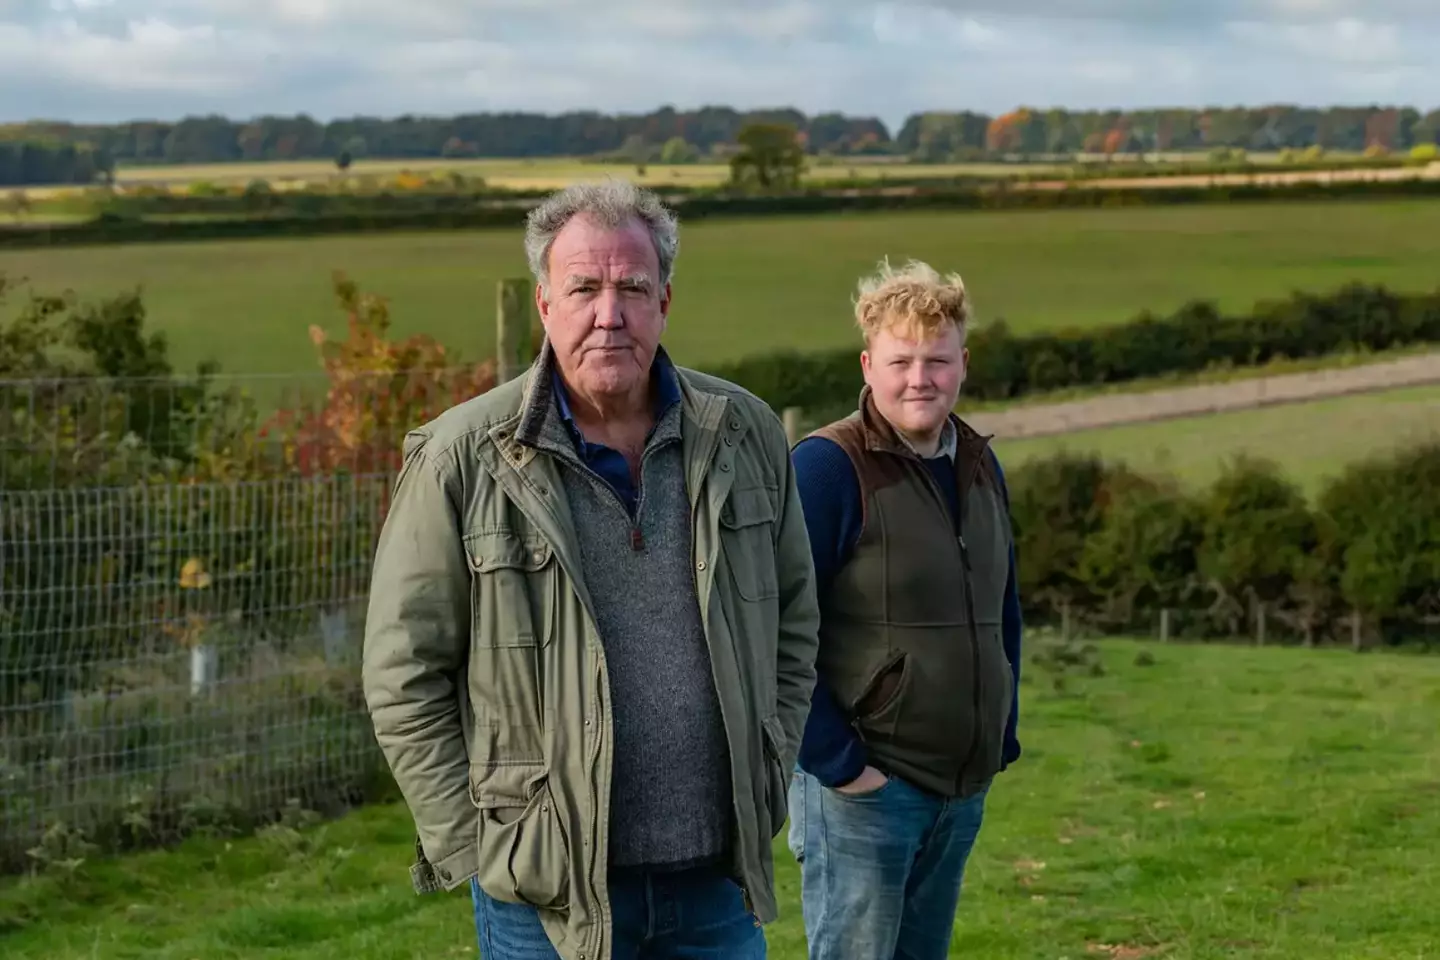 'No decisions' have been made on the future of Clarkson's Farm.